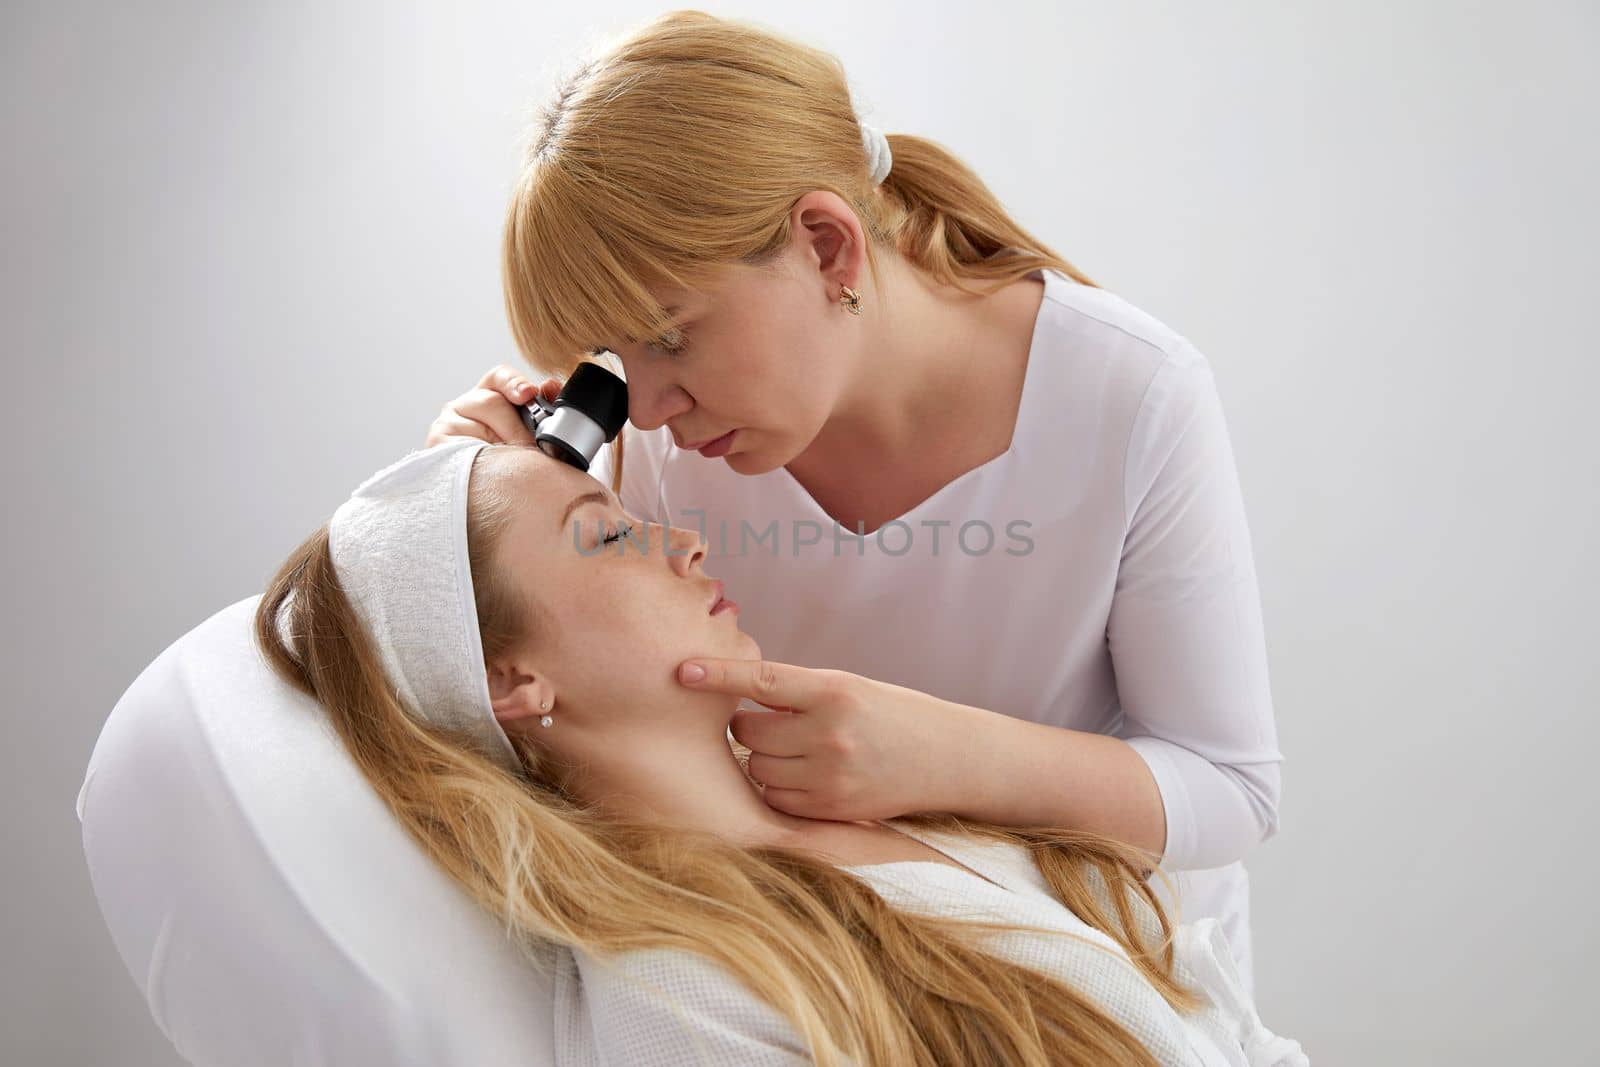 Female doctor looking at patient's skin through magnifying glass. Professional dermatologist and skincare specialist investigating moles or tumor growth signs on wfemale face. Skin checkup concept